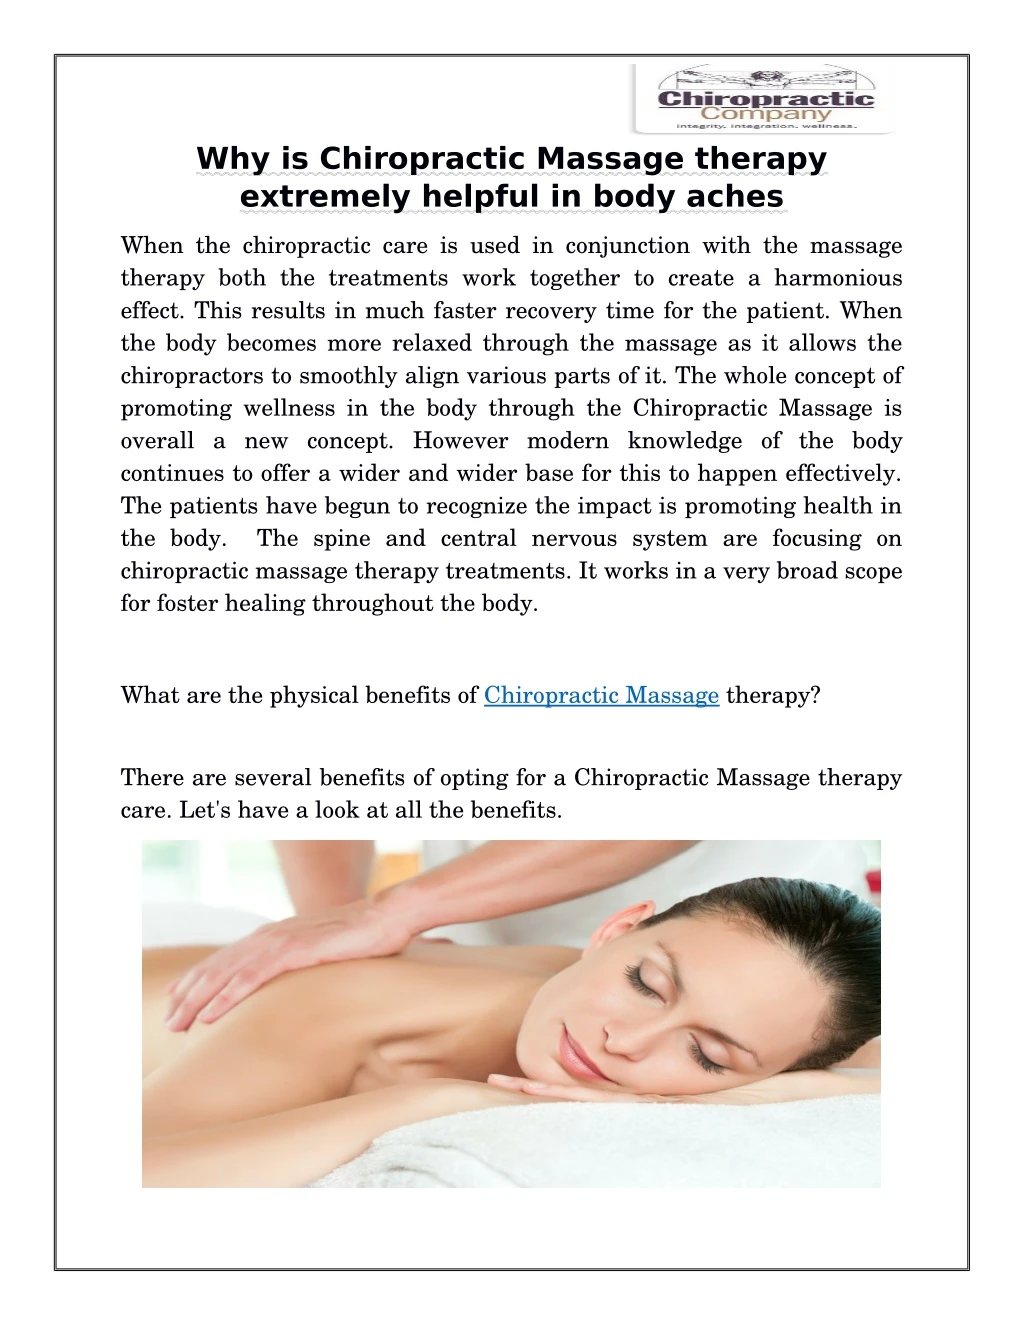 why is chiropractic massage therapy extremely